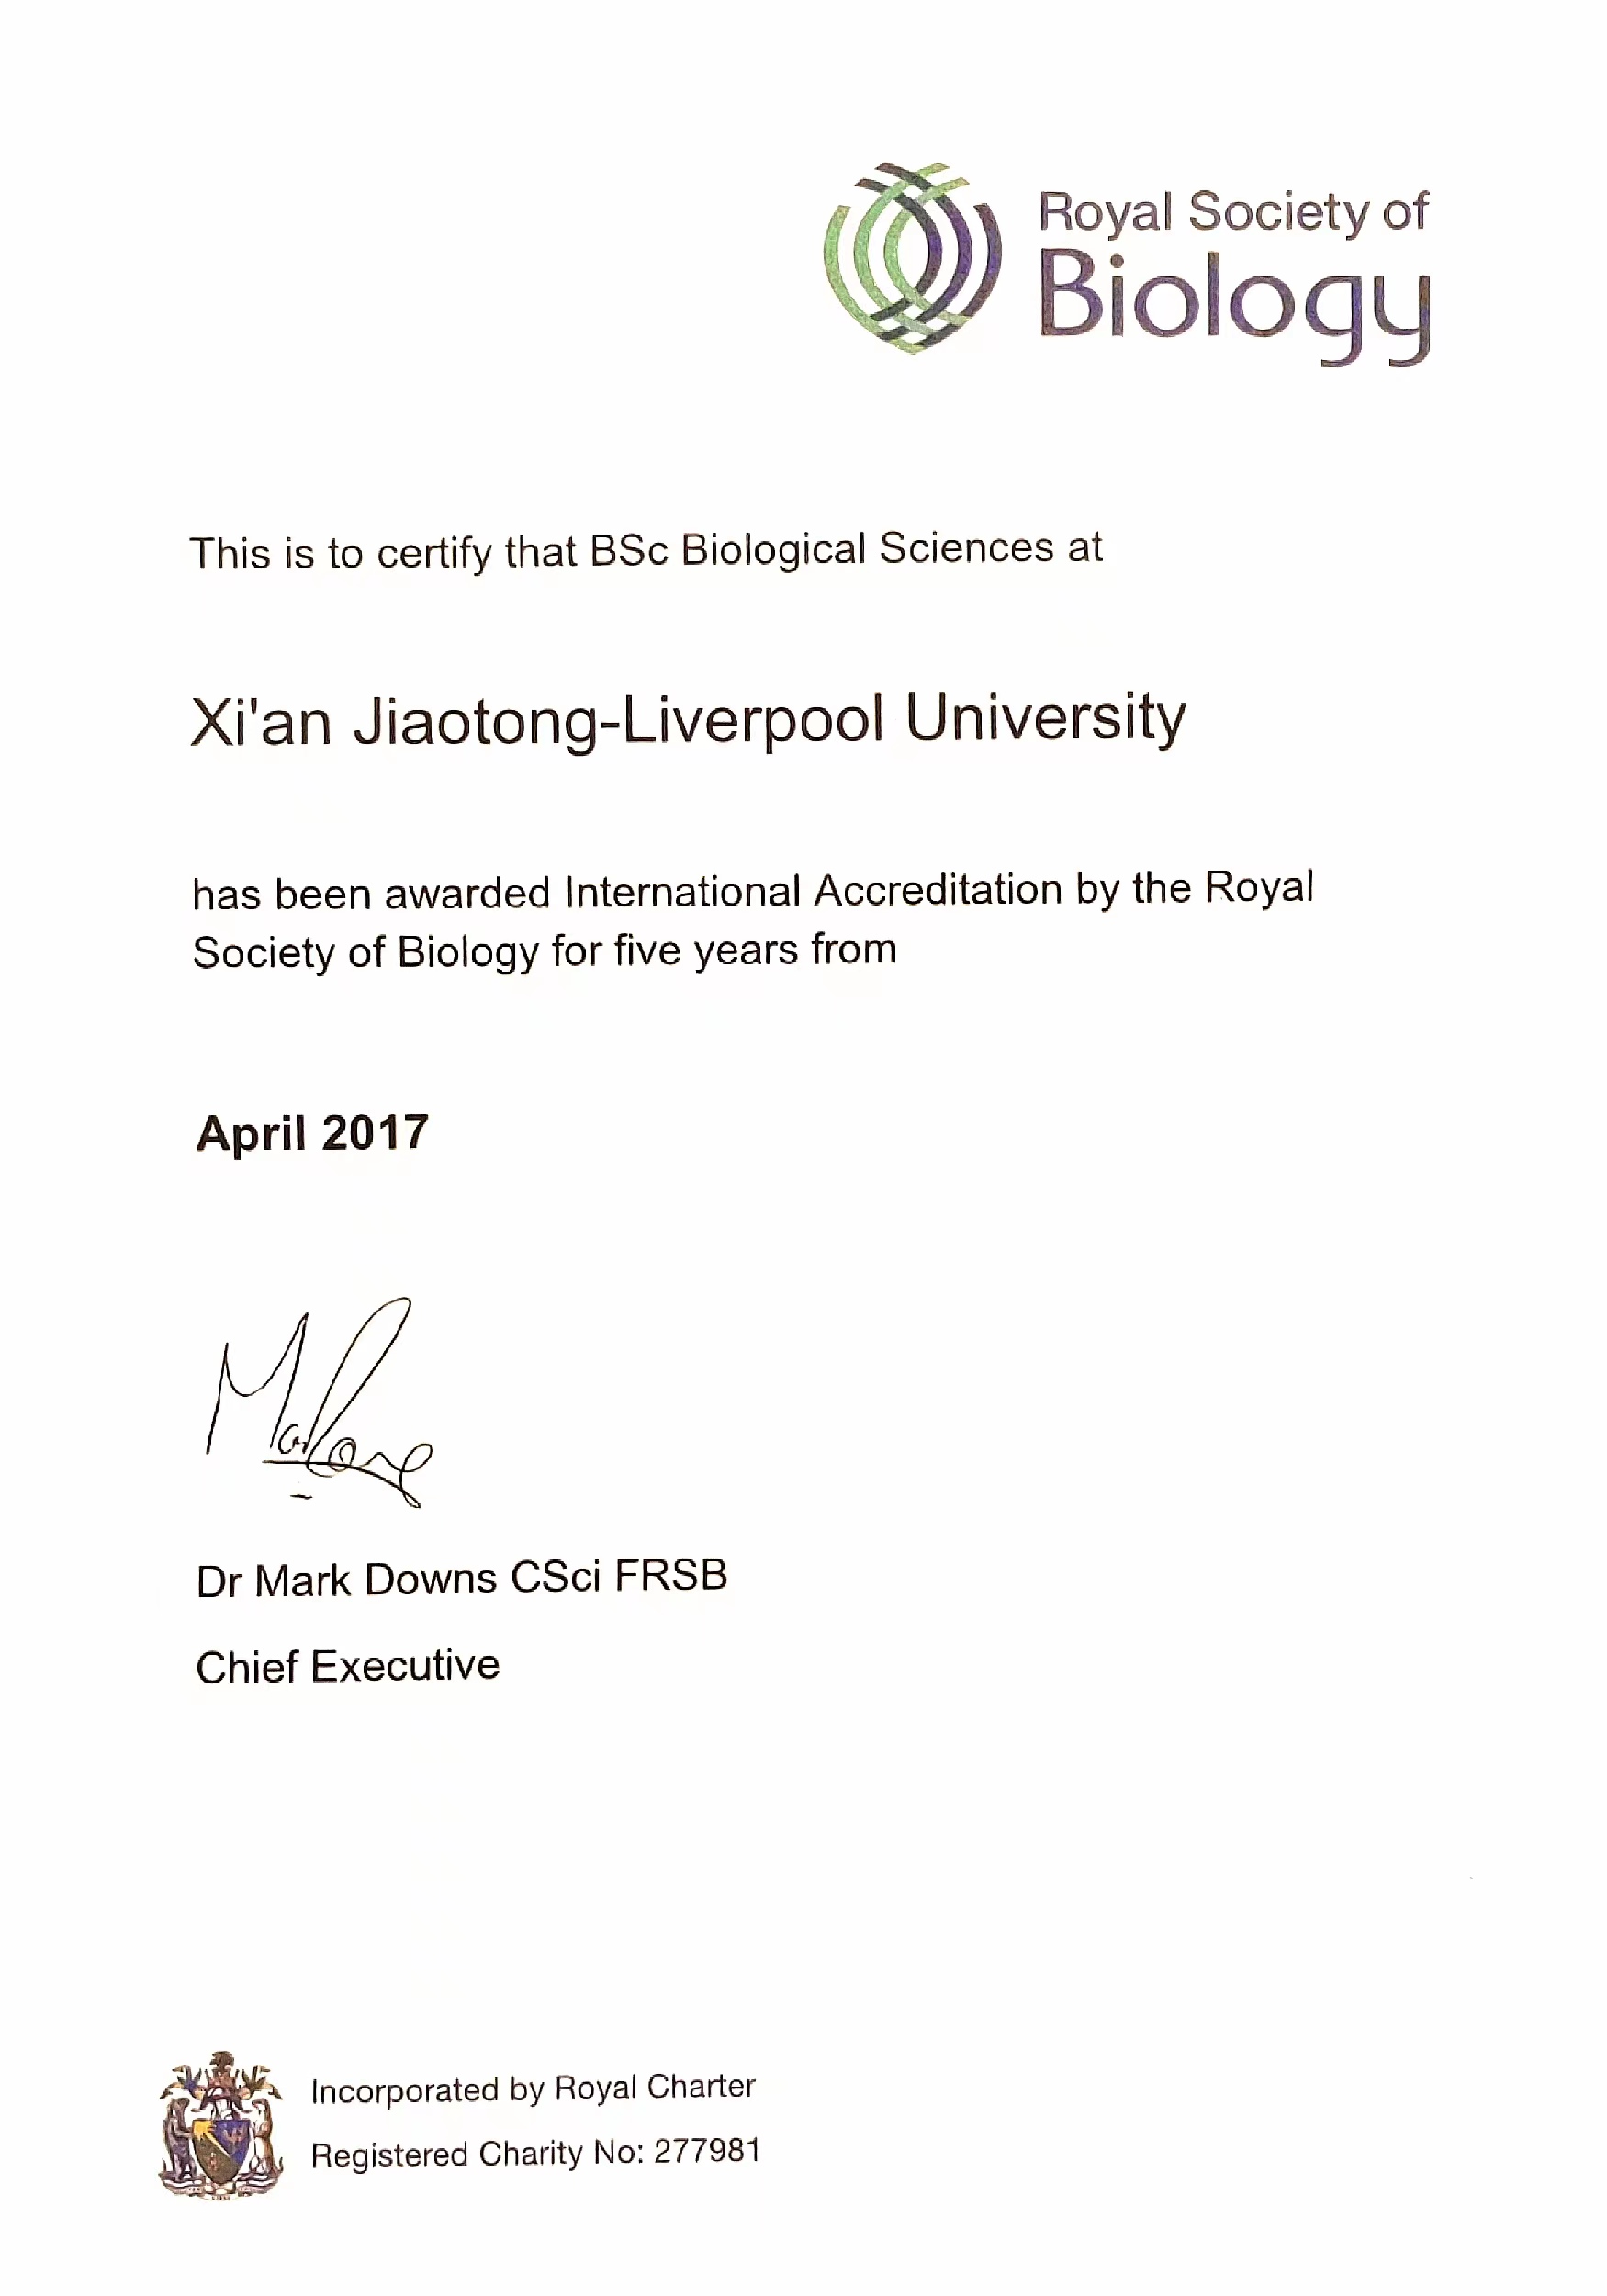 <p>Awarded international accreditation by the Royal Society of Biology (RSB)</p>